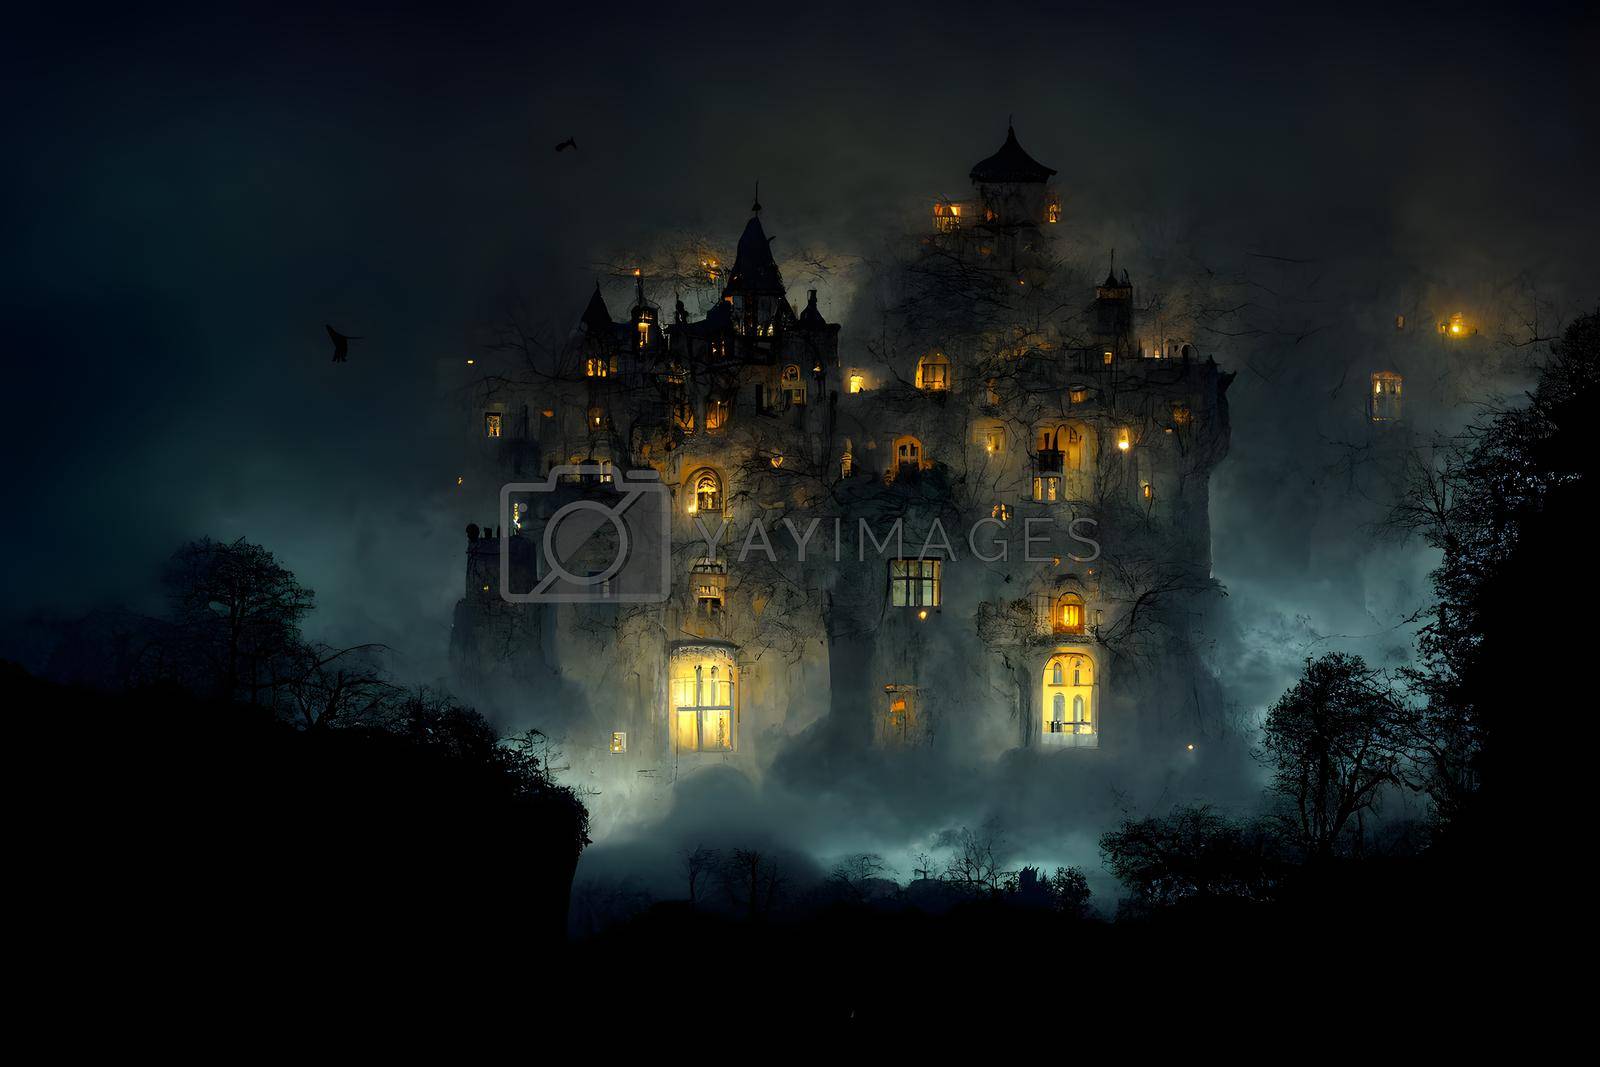 Royalty free image of large haunted castle with many illuminated windows at spooky misty dark halloween night, neural network generated art by z1b